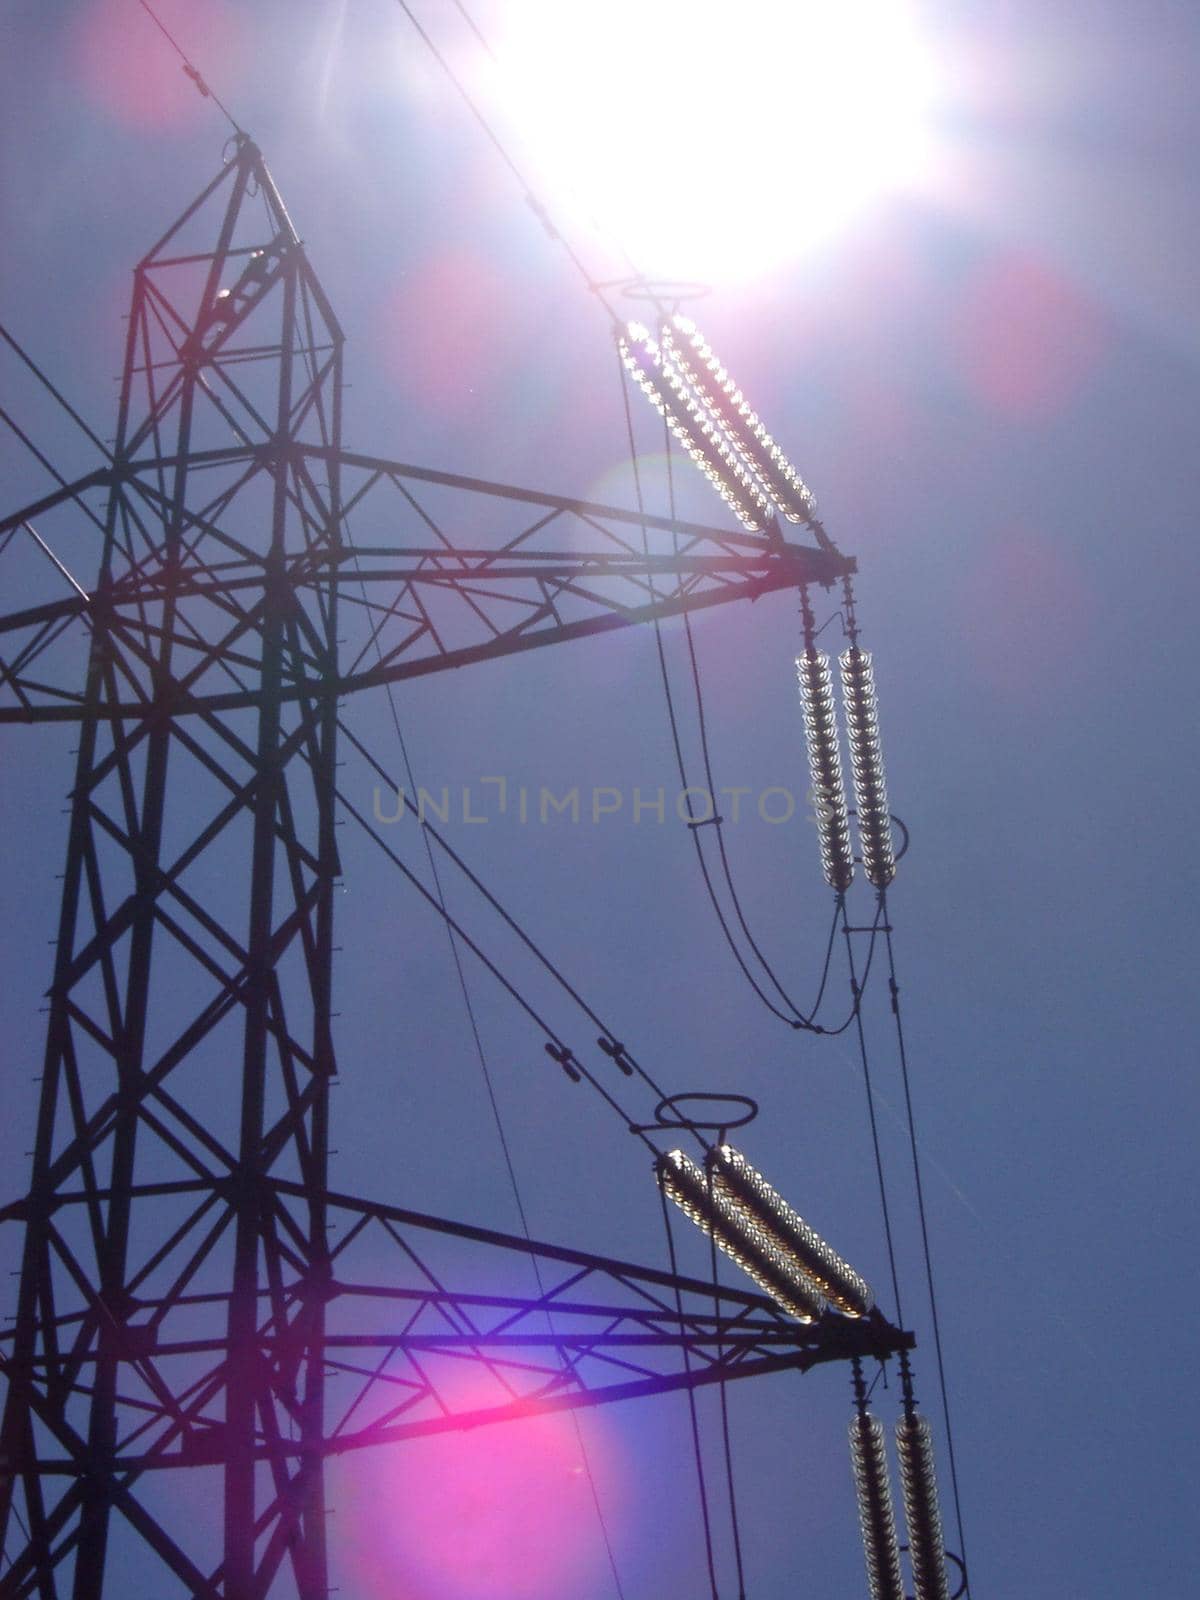 View looking up into the sun of a high voltage electricity pylon with pink sun flare spots